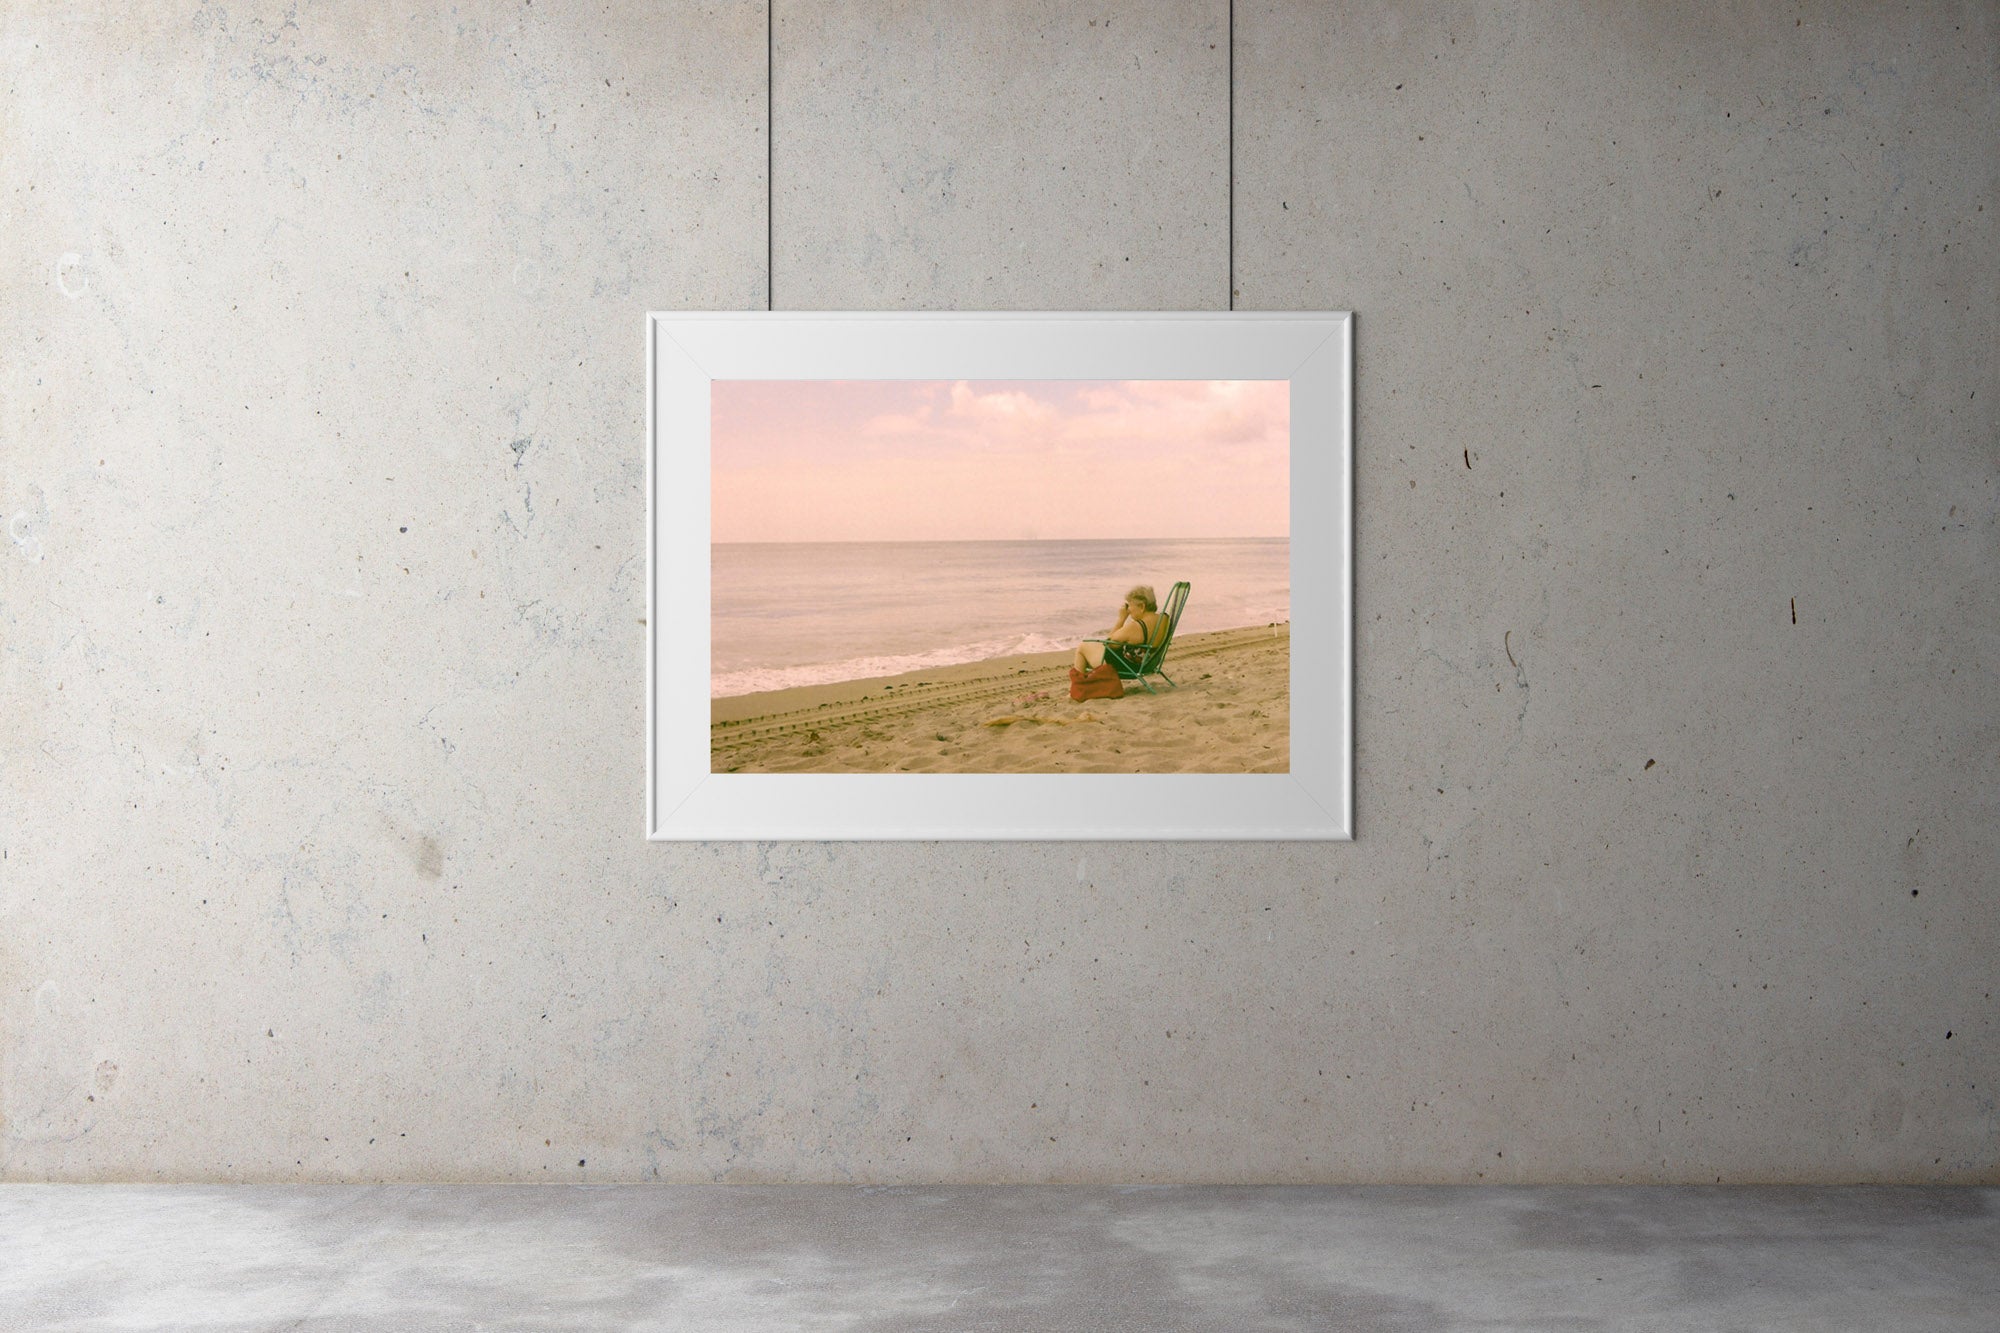 Miami Beach in the morning, an old lady sits on ther beach taking a photo of the ocean, sand & blue calm water, Artwork Prints, wallart, Melbourne travel, Photographic prints, Framed artwork, Australian Photography, wall art, Film photography, Vintage photo, style Interior design, Pictures Abstract film photography, photography art